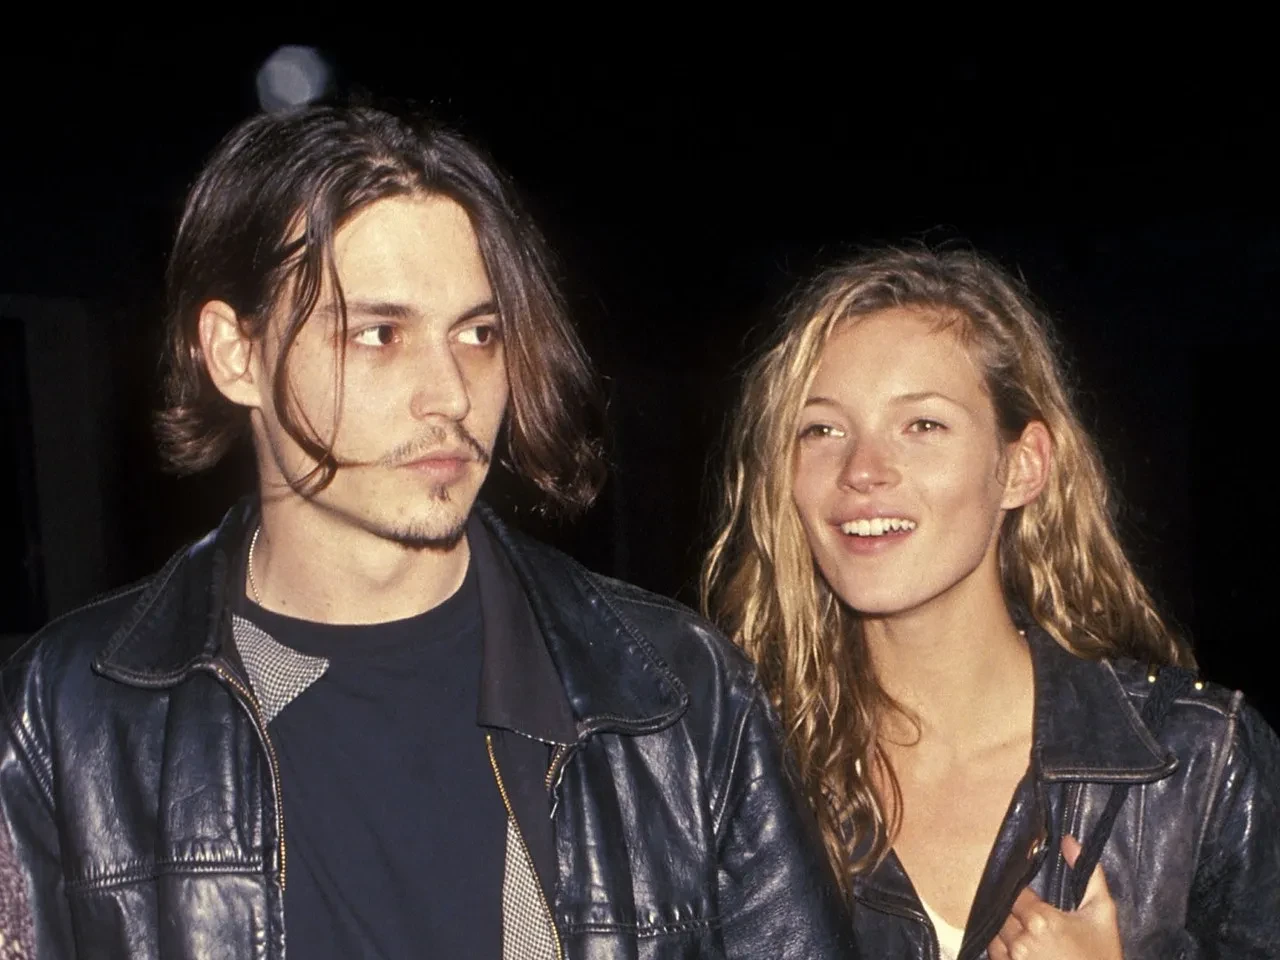 Johnny Depp and Kate Moss during their time together